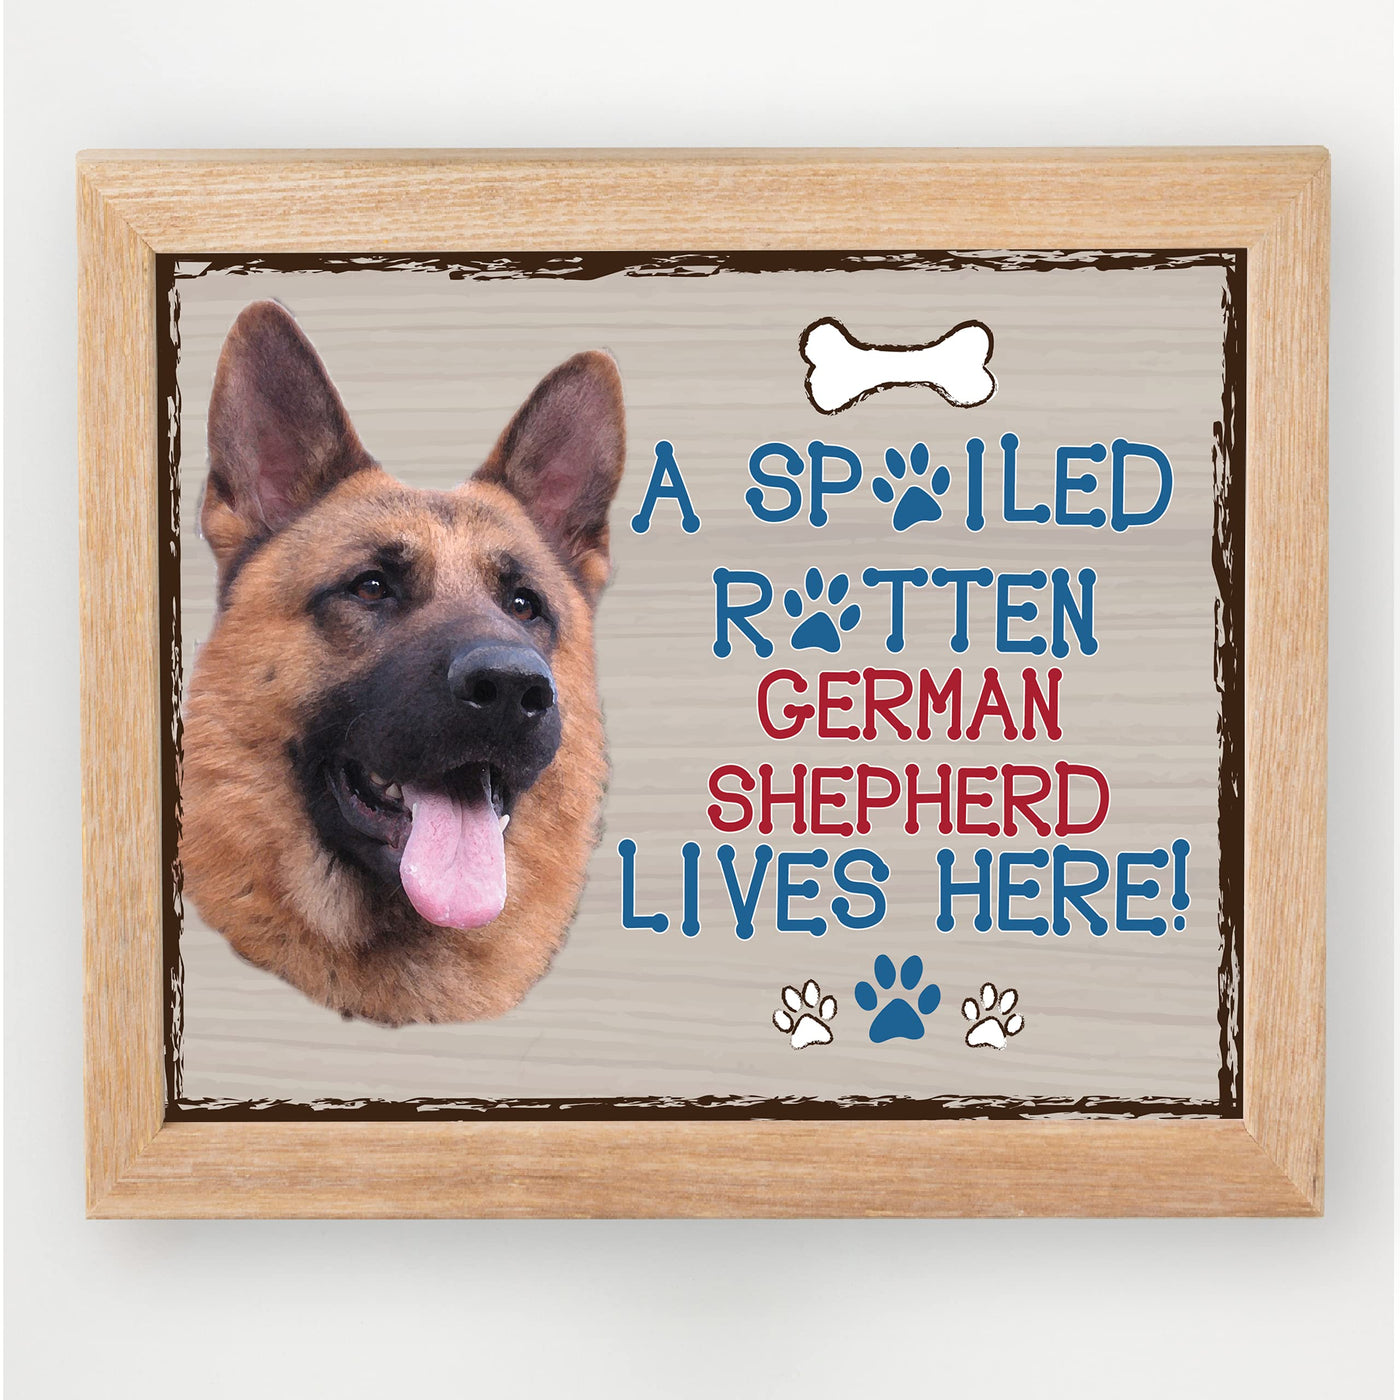 German Shepherd-Dog Poster Print-10 x 8" Wall Decor Sign-Ready To Frame."A Spoiled Rotten German Shepherd Lives Here". Perfect Pet Wall Art for Home-Kitchen-Cave-Bar-Garage. Great Gift for GS Owner.